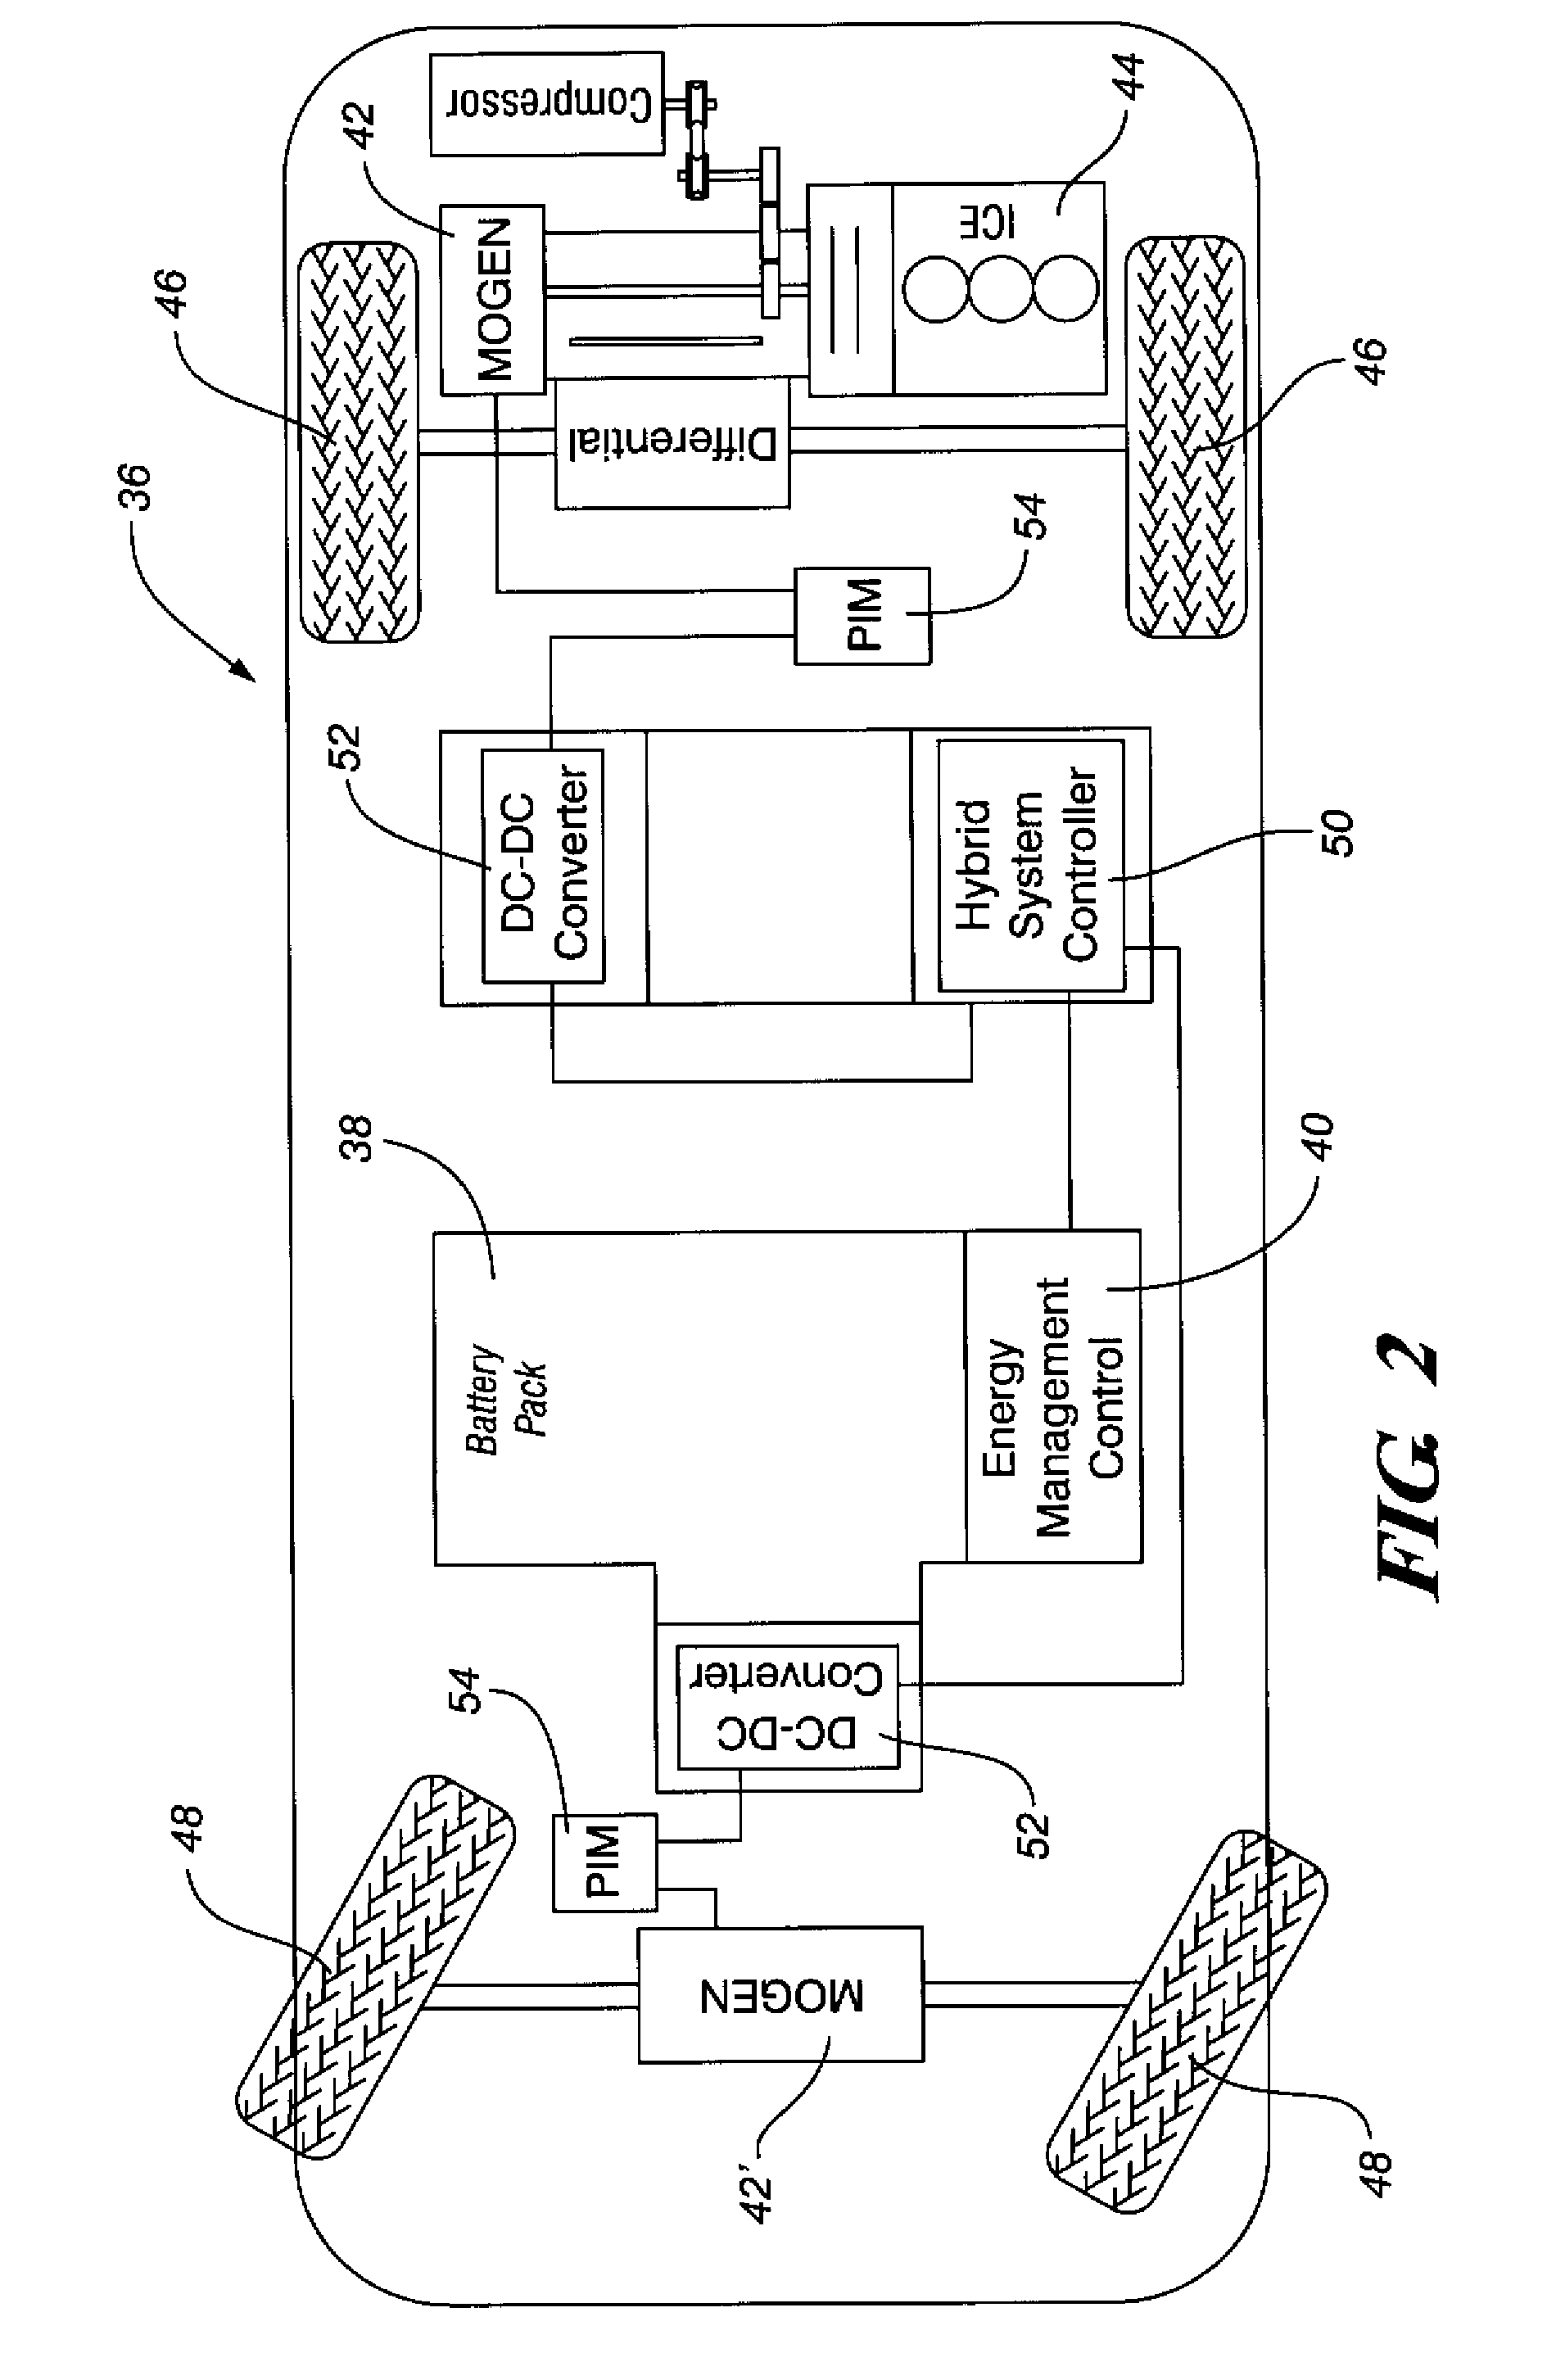 Method and apparatus for generalized recursive least-squares process for battery state of charge and state of health